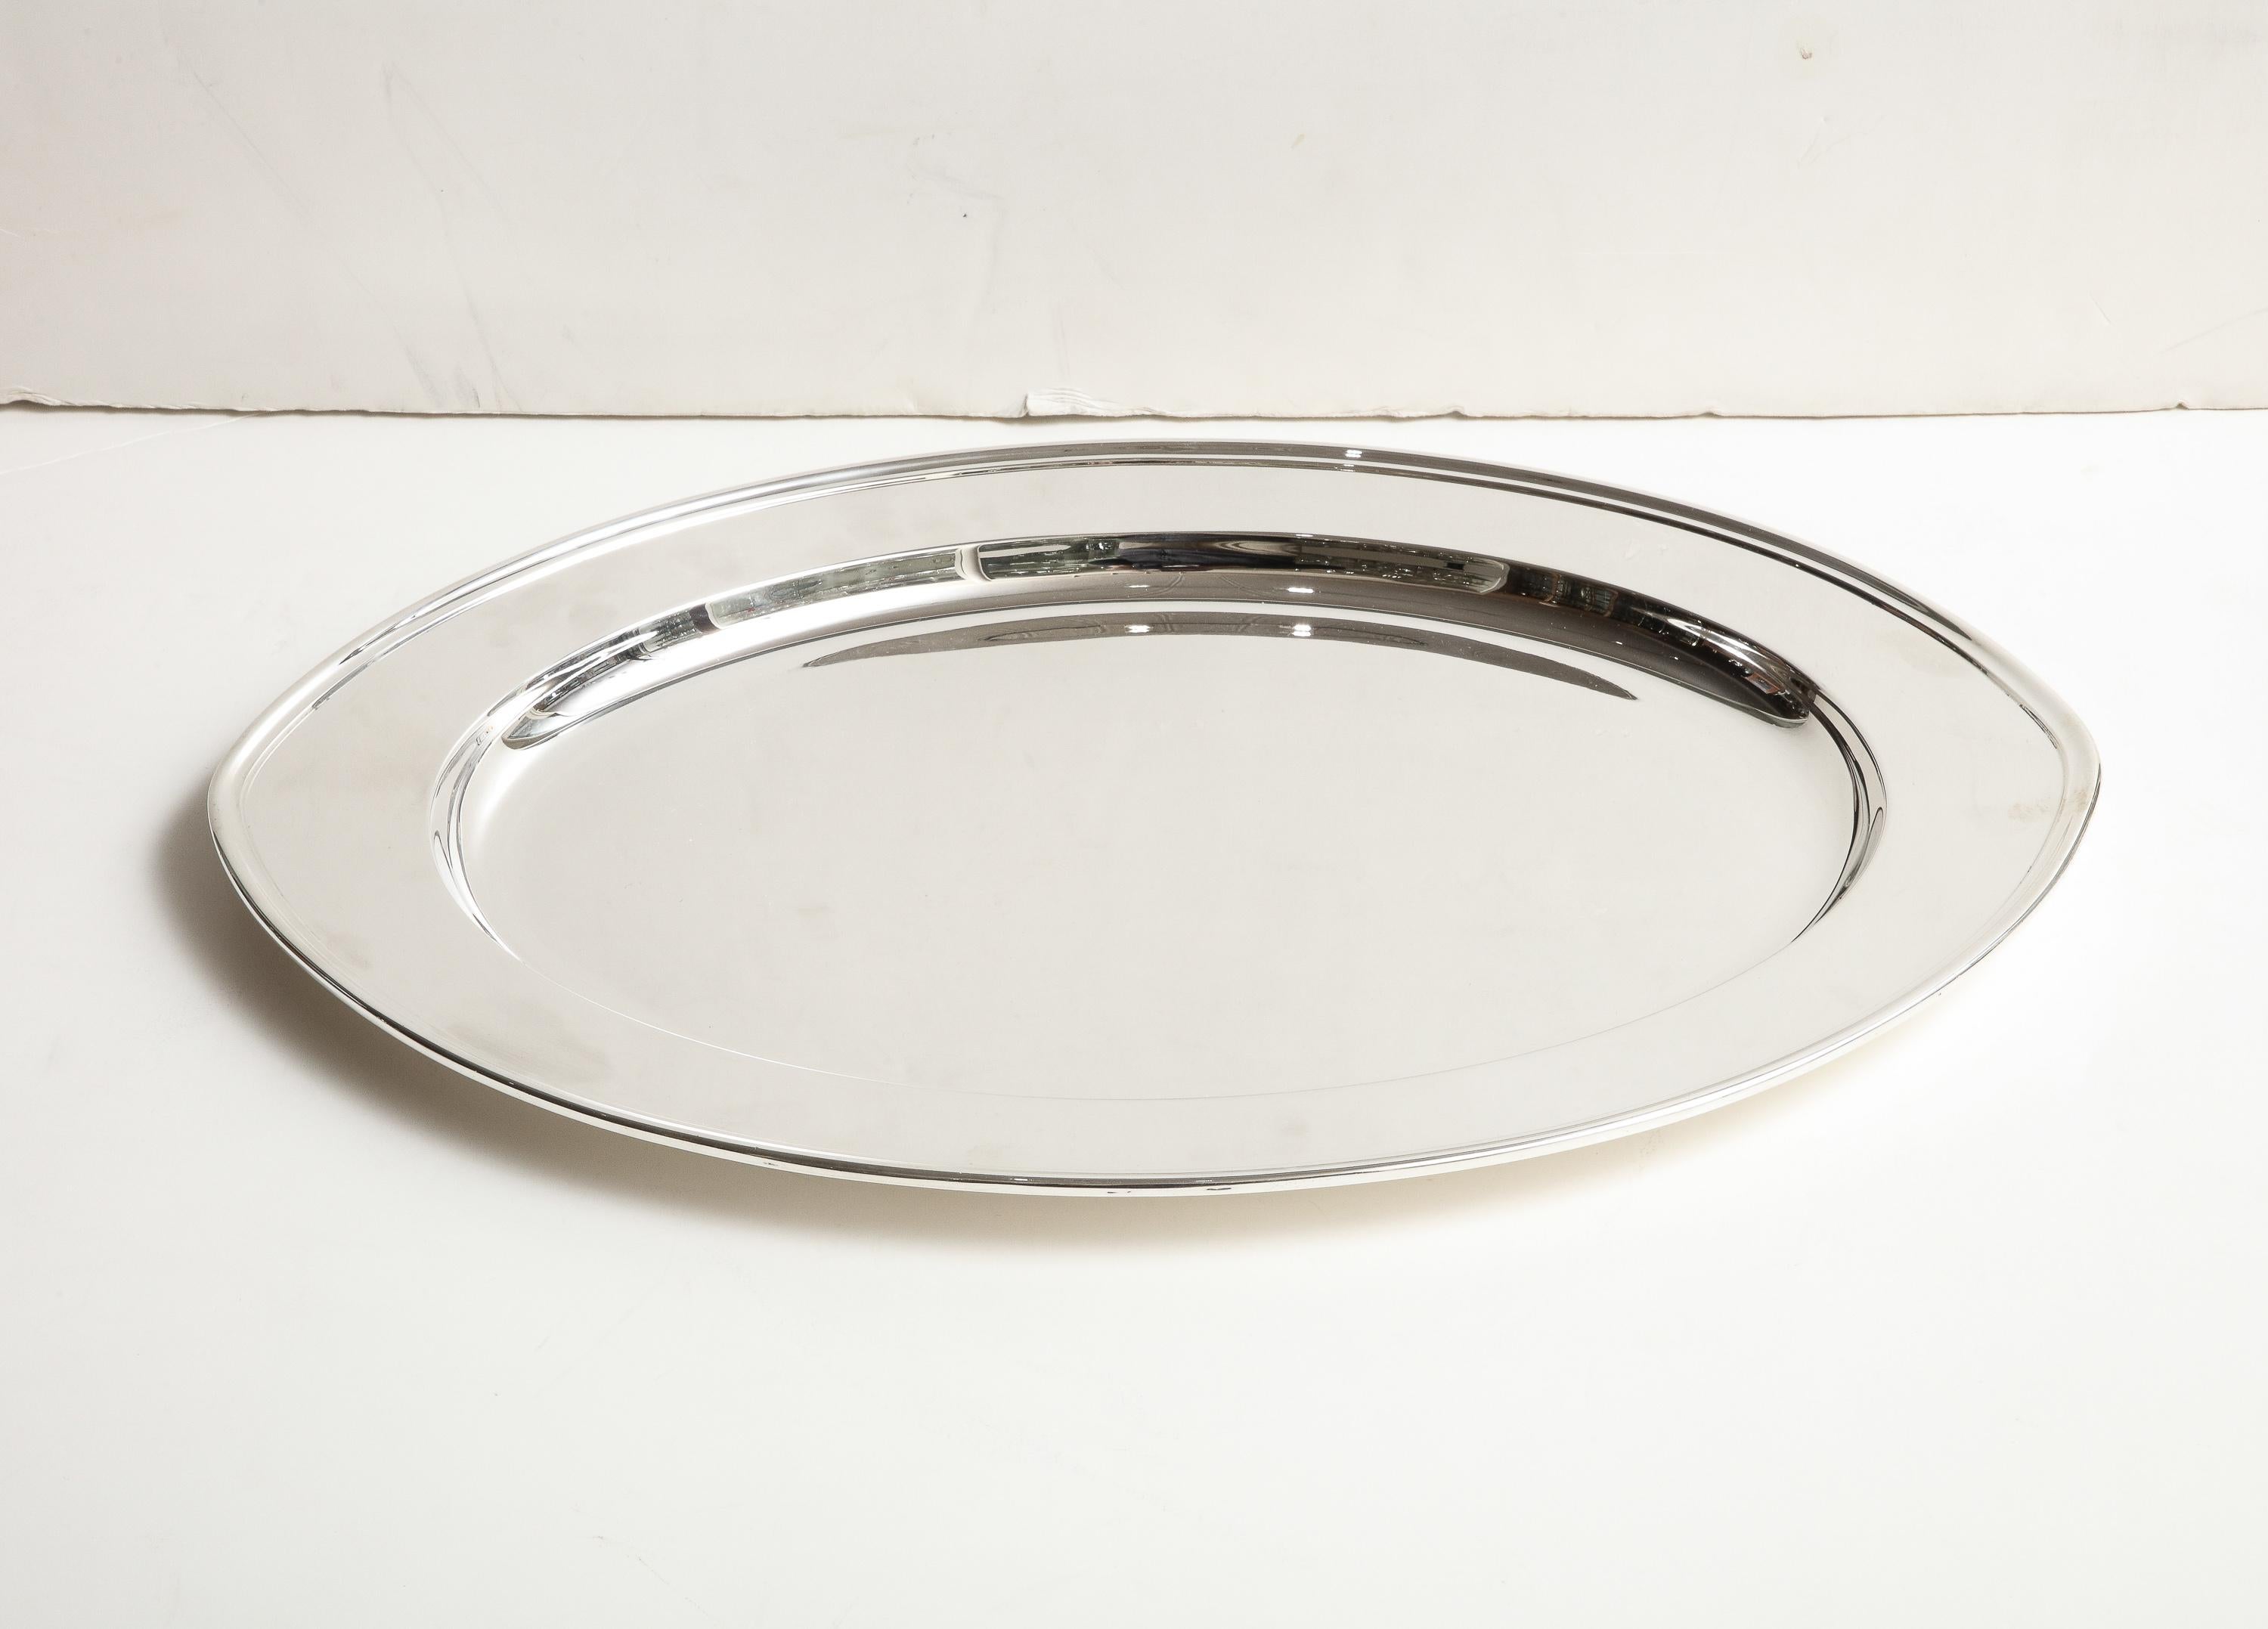 Large Art Deco Period Solid Sterling Silver Serving Platter By Gorham For Sale 2